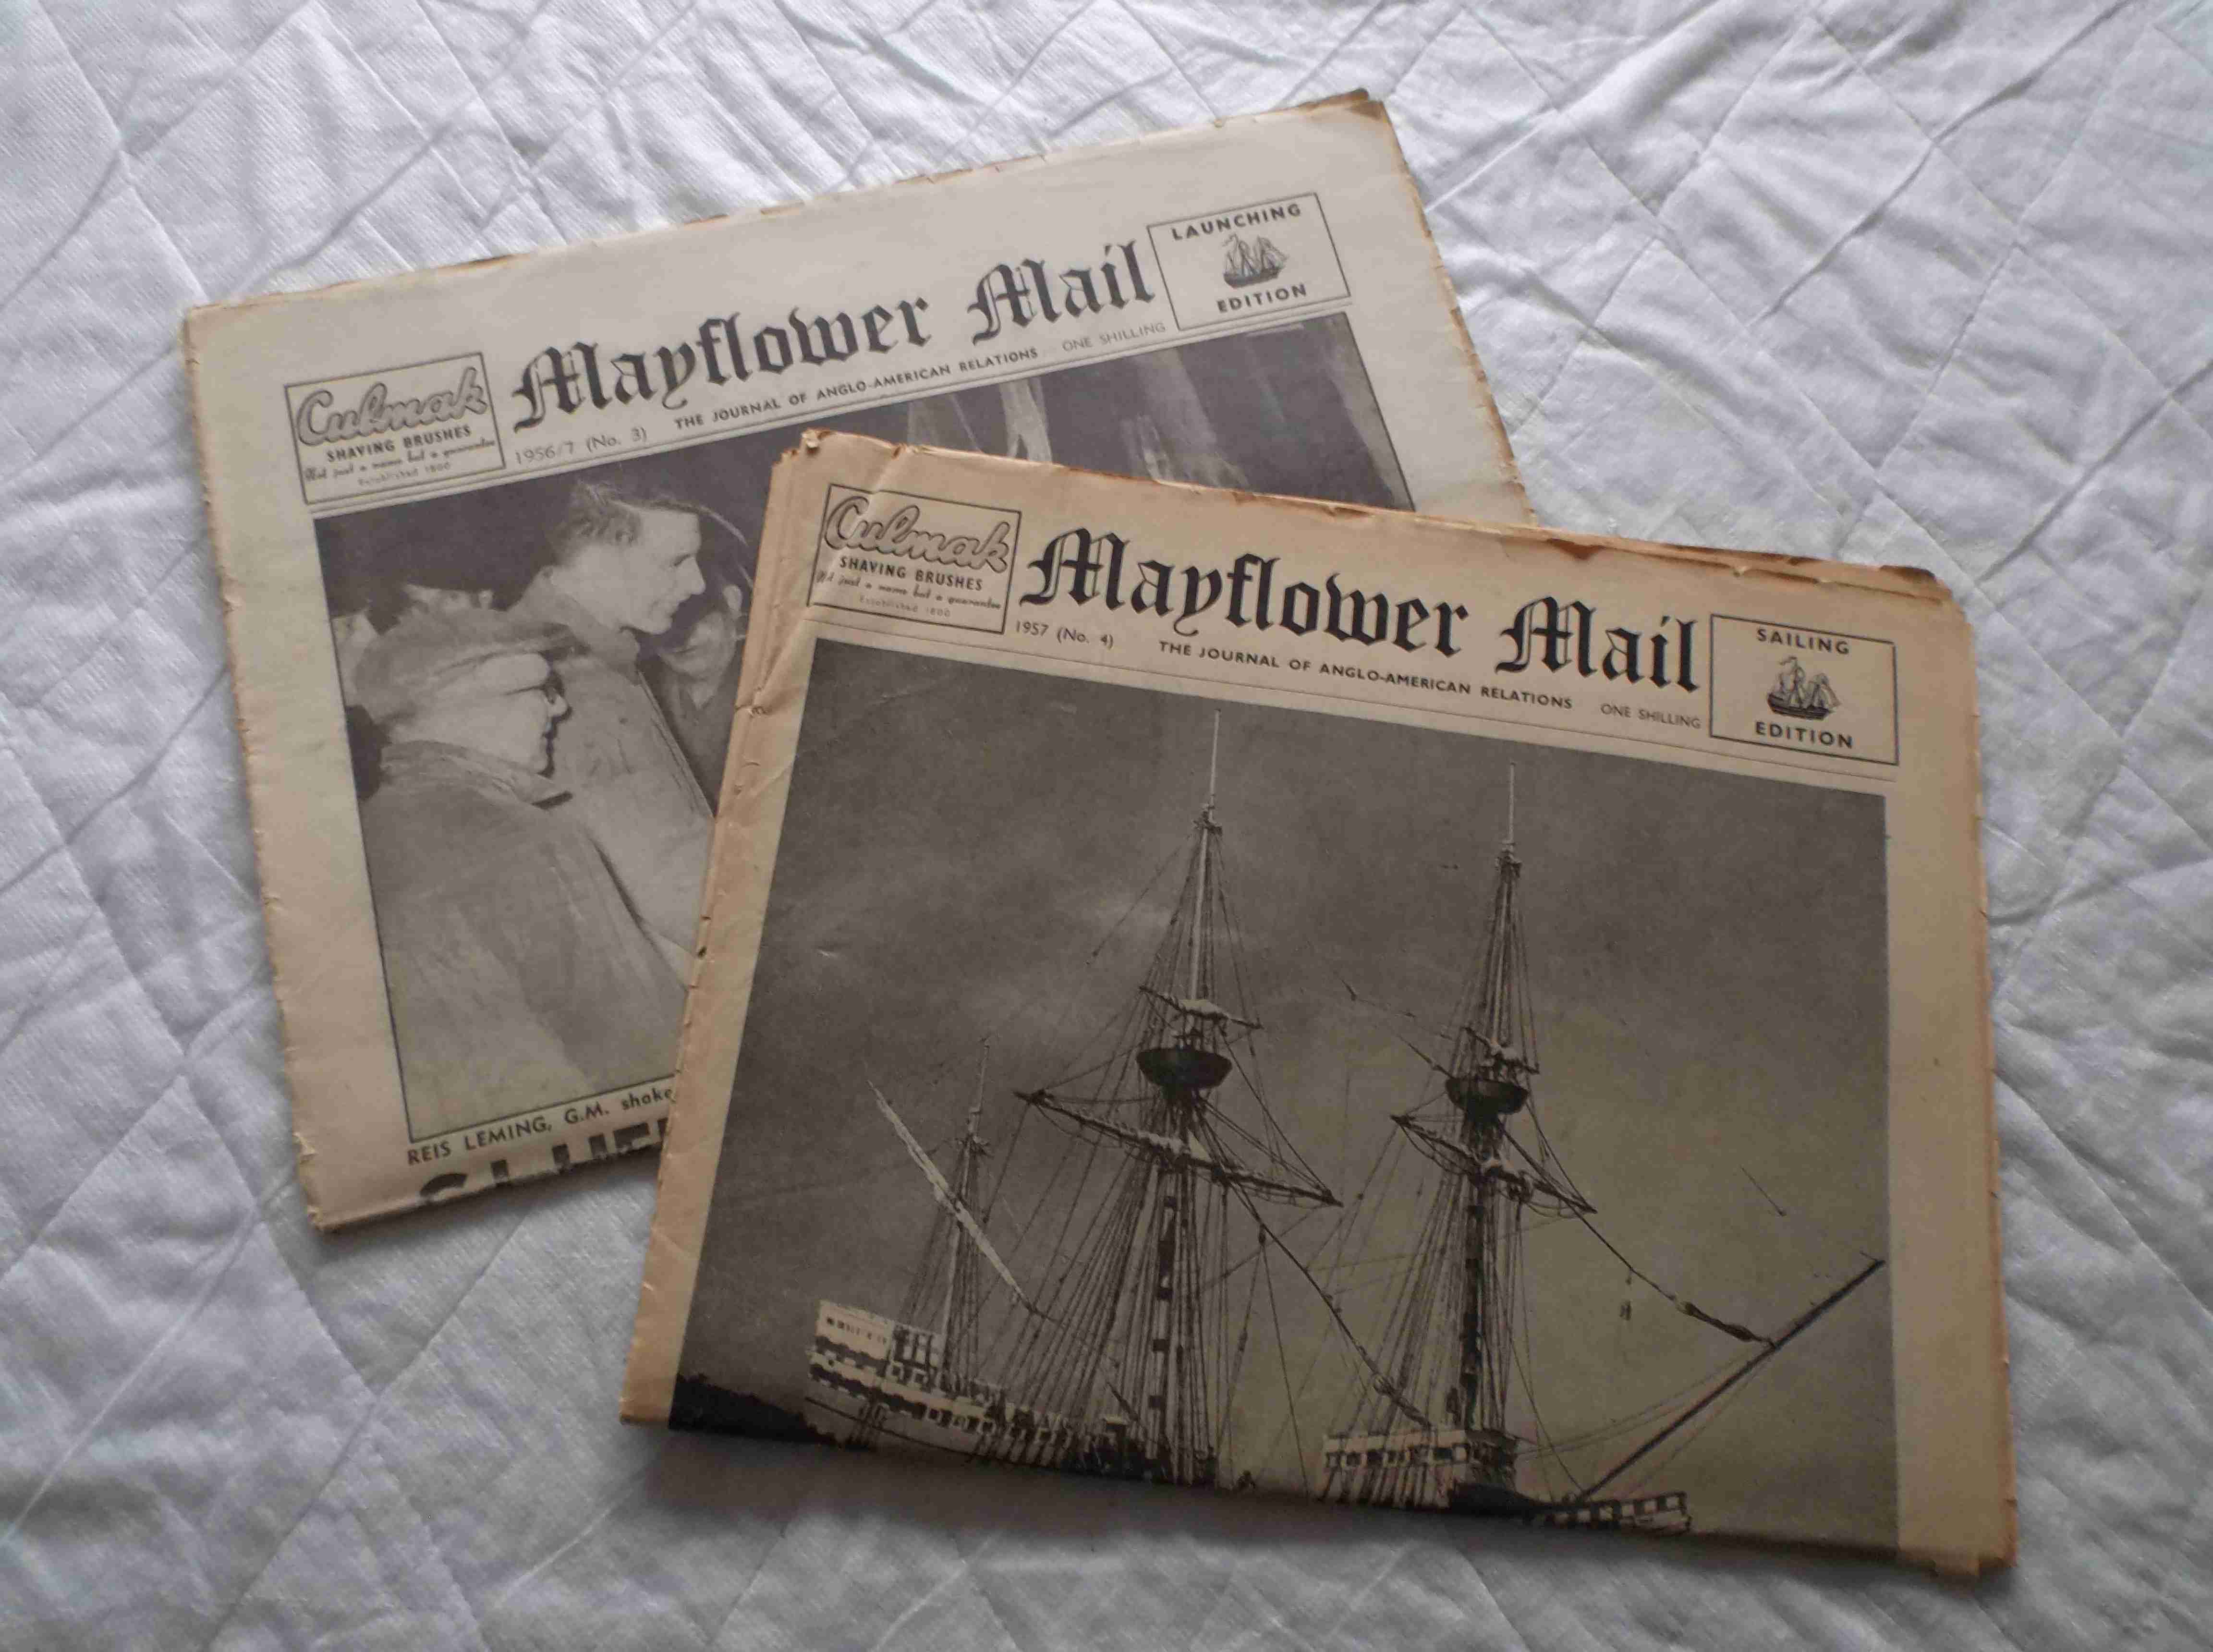 TWO COPIES OF THE NEWSPAPER THE MAYFLOWER MAIL DATED 1957